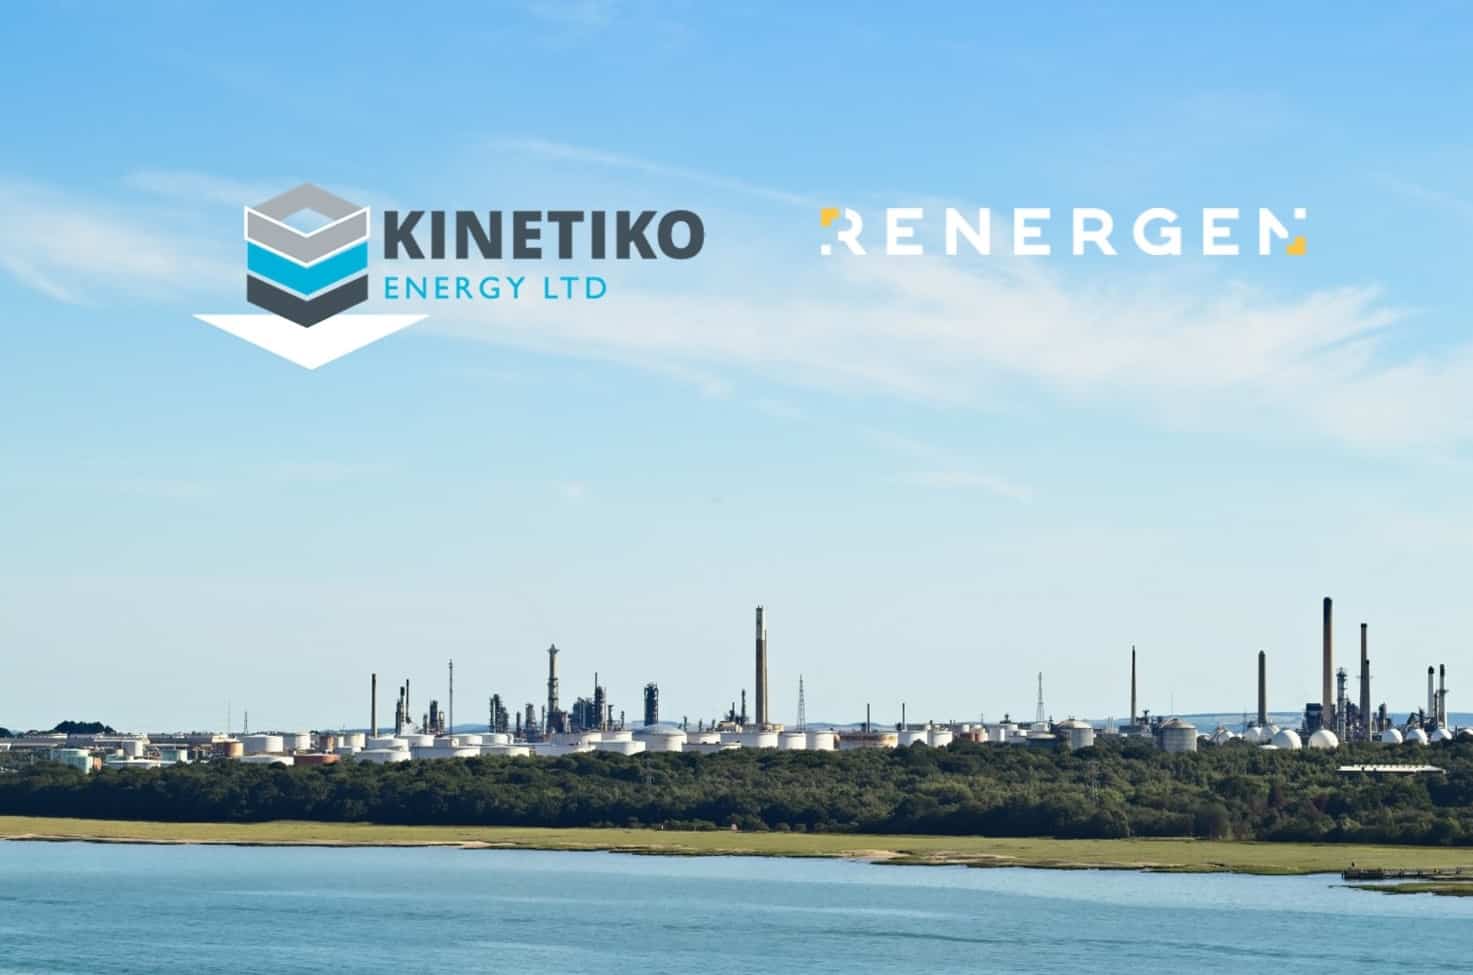 KINETIKO AND RENERGEN: HOW DOMESTIC GAS PRODUCTION CAN HELP MITIGATE SOUTH AFRICA’S ENERGY CRISIS